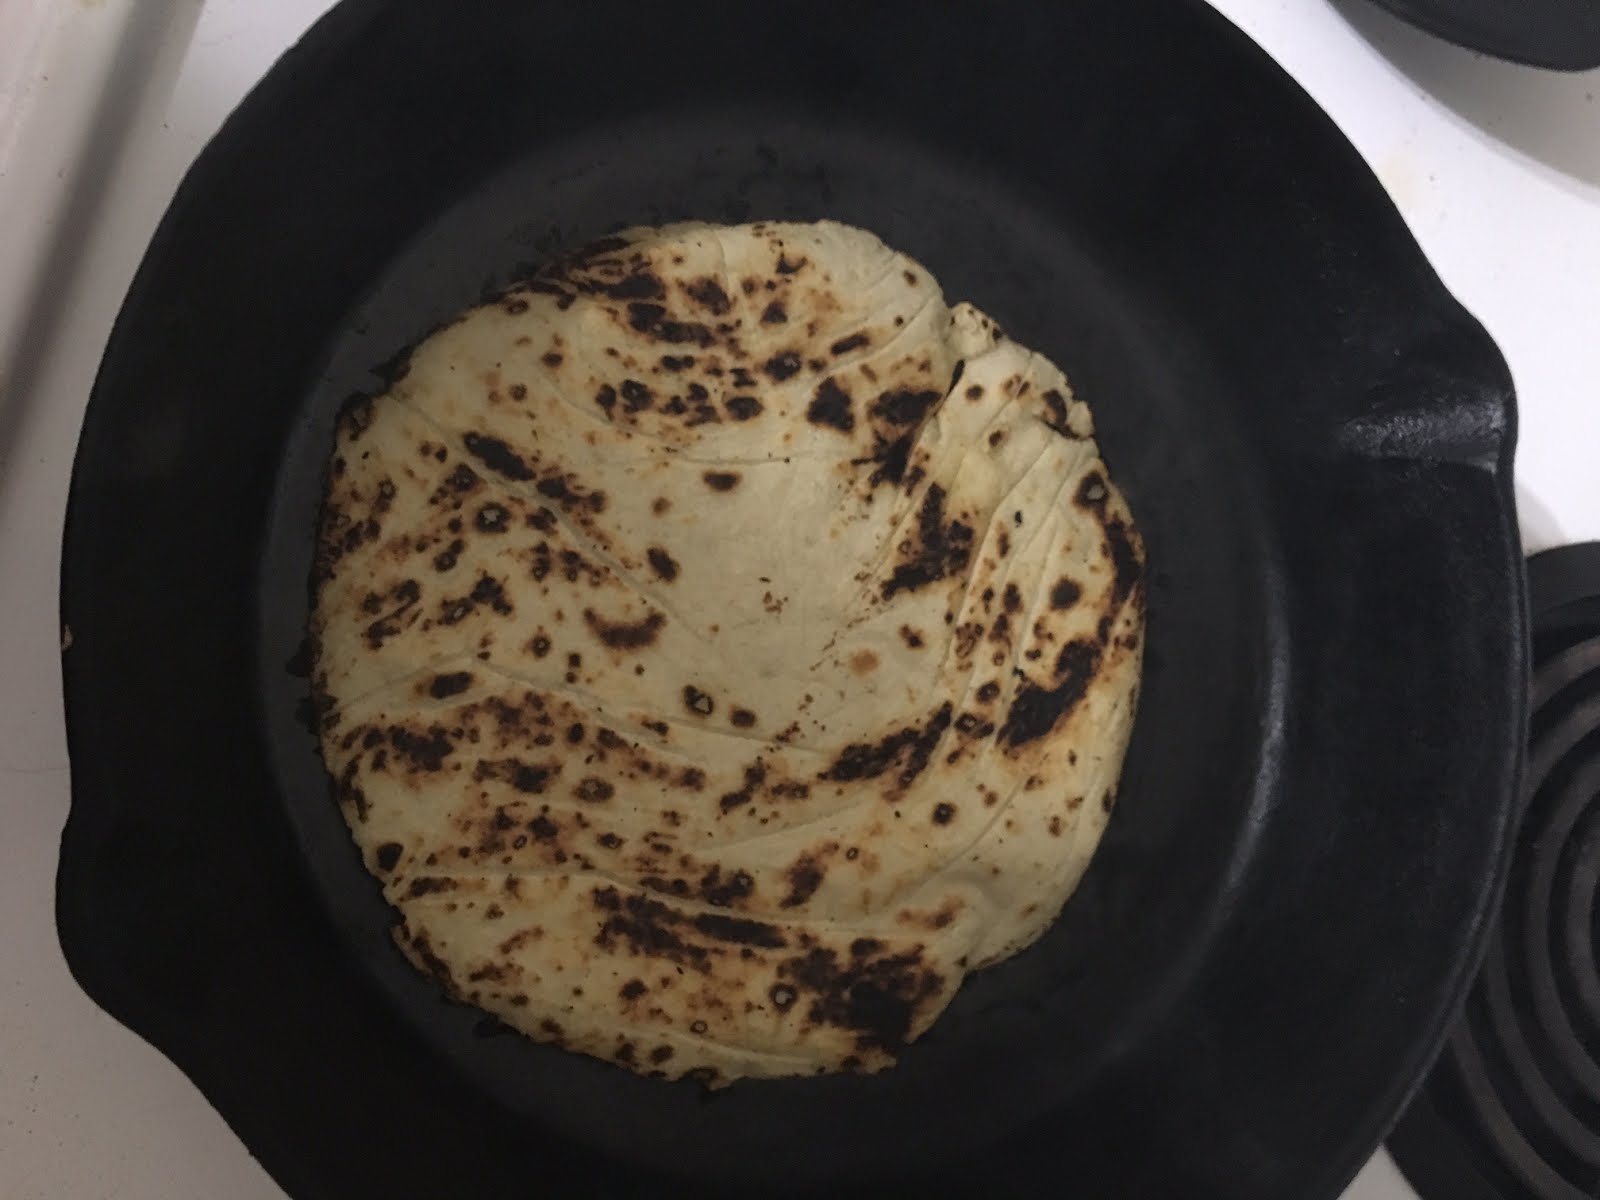 Finally It's a tortilla! you want those beautiful spots on them. Sadly only the first side will have them that perfect.